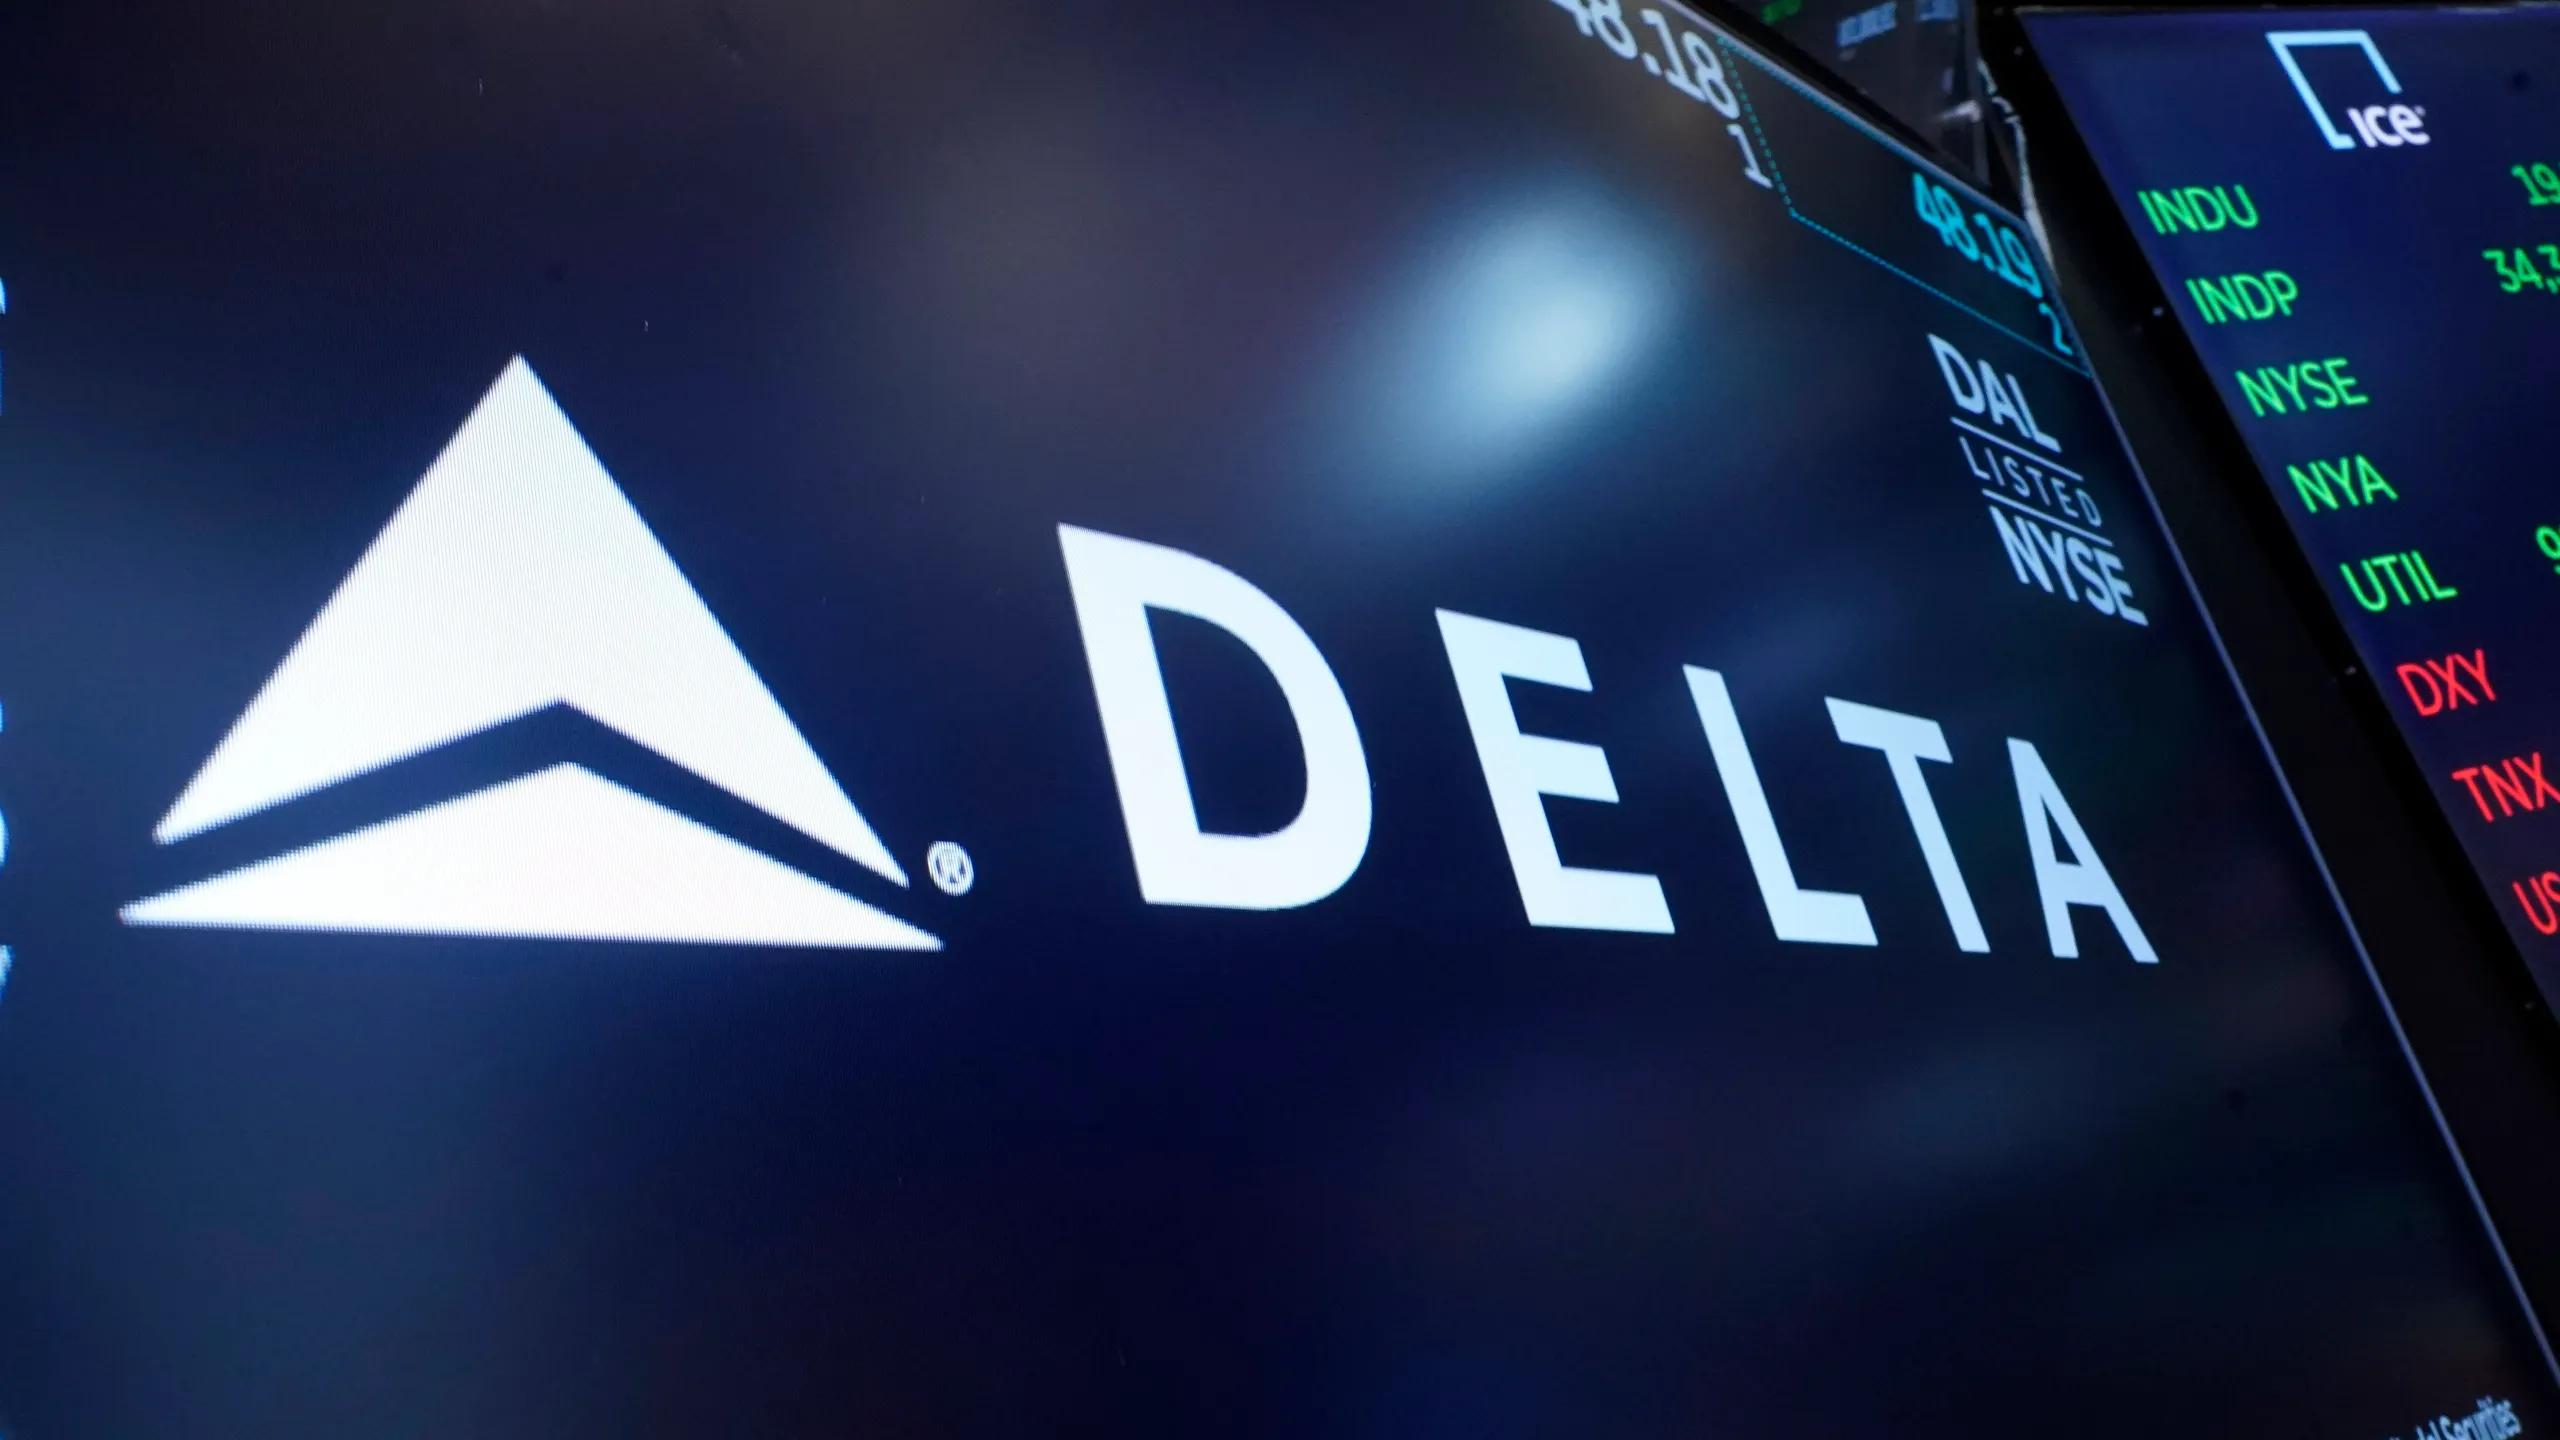 
10 Significant Delta Airline Business Partners You Need To Know About